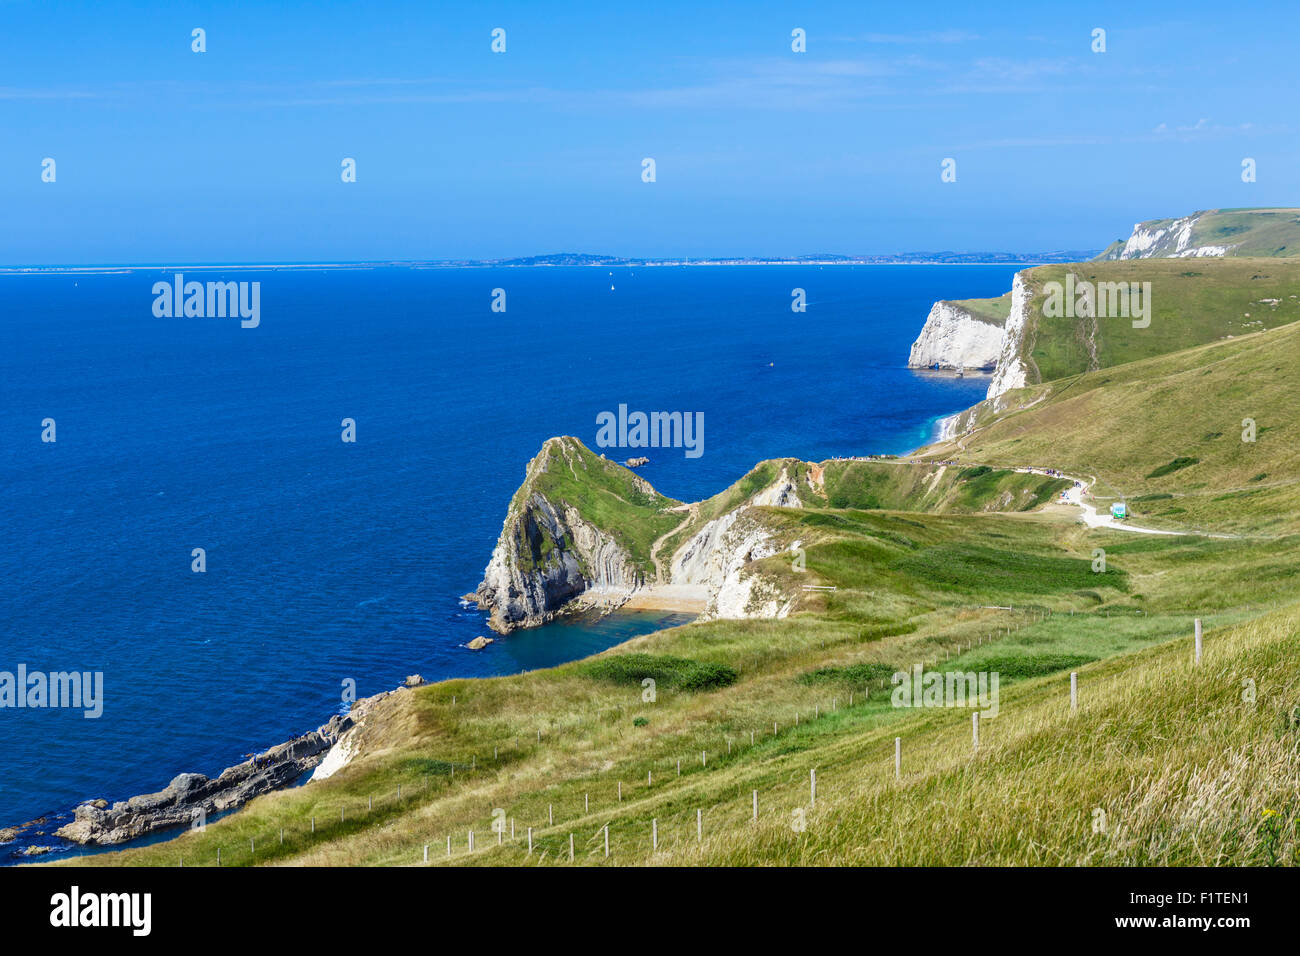 View from the South West Coast Path overlooking Durdle Door, near Lulworth, Jurassic Coast, Dorset, England, UK Stock Photo